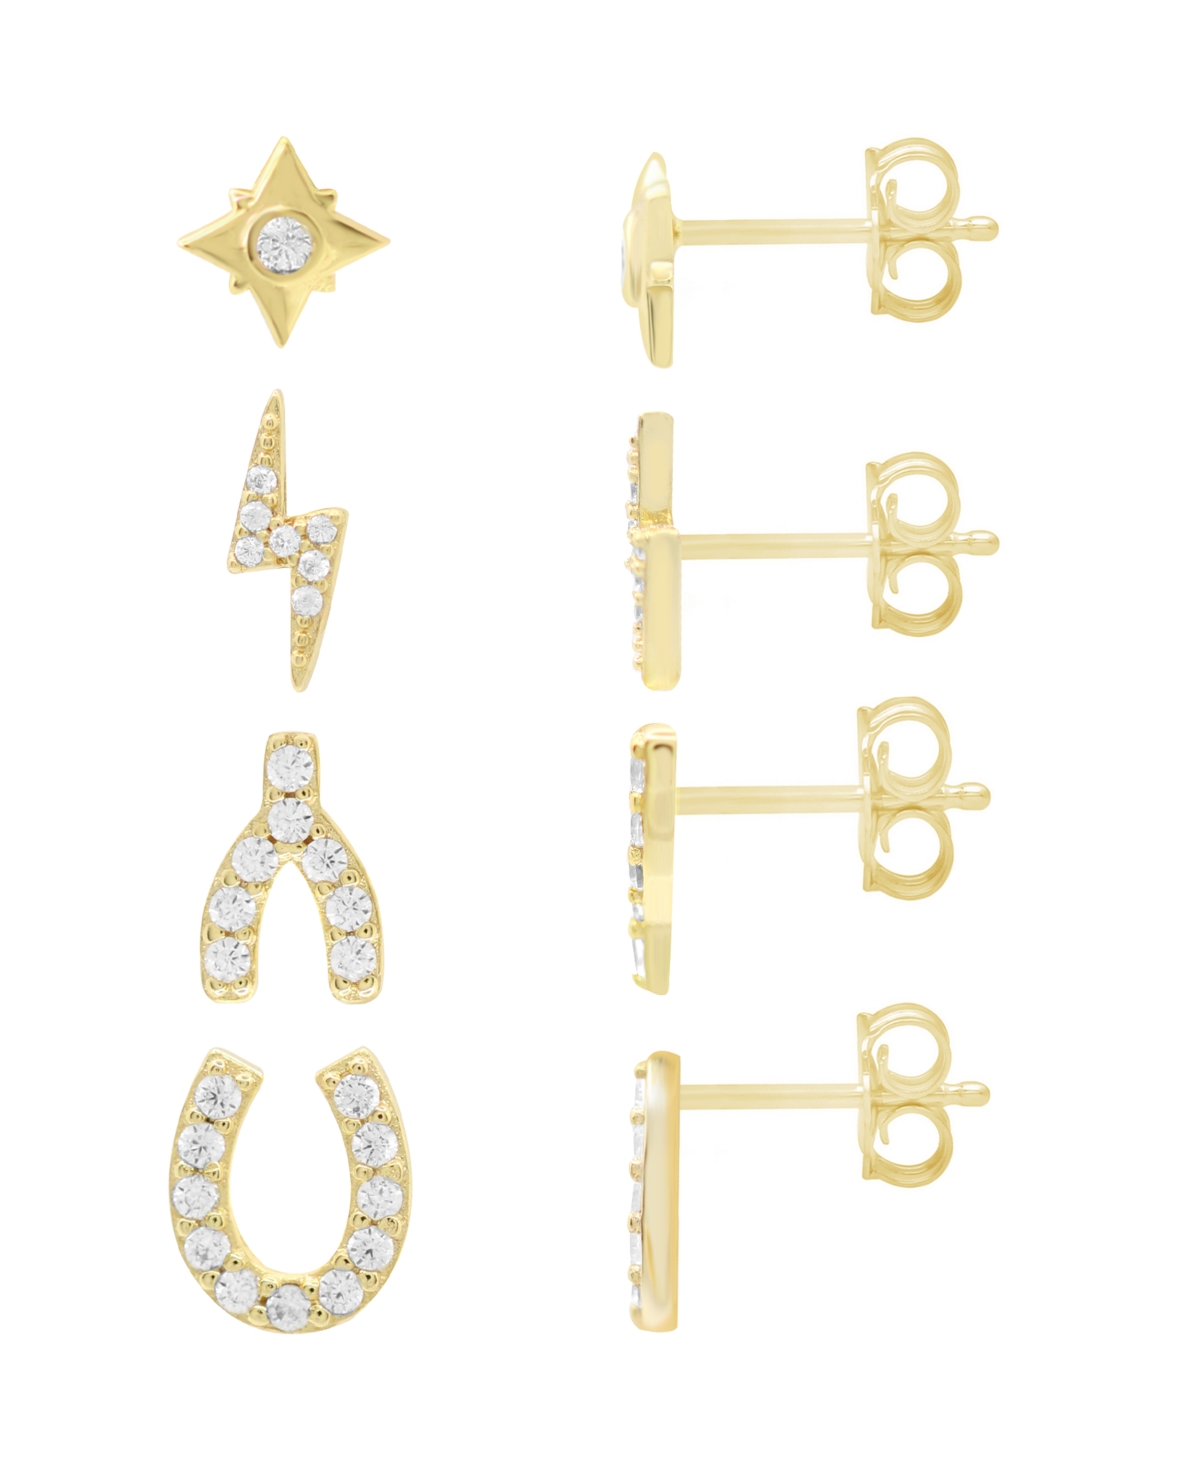 High Polished and Cubic Zirconia Multi Motif Mix Match 4 Stud Earring Set, Gold Plate - Gold-Tone